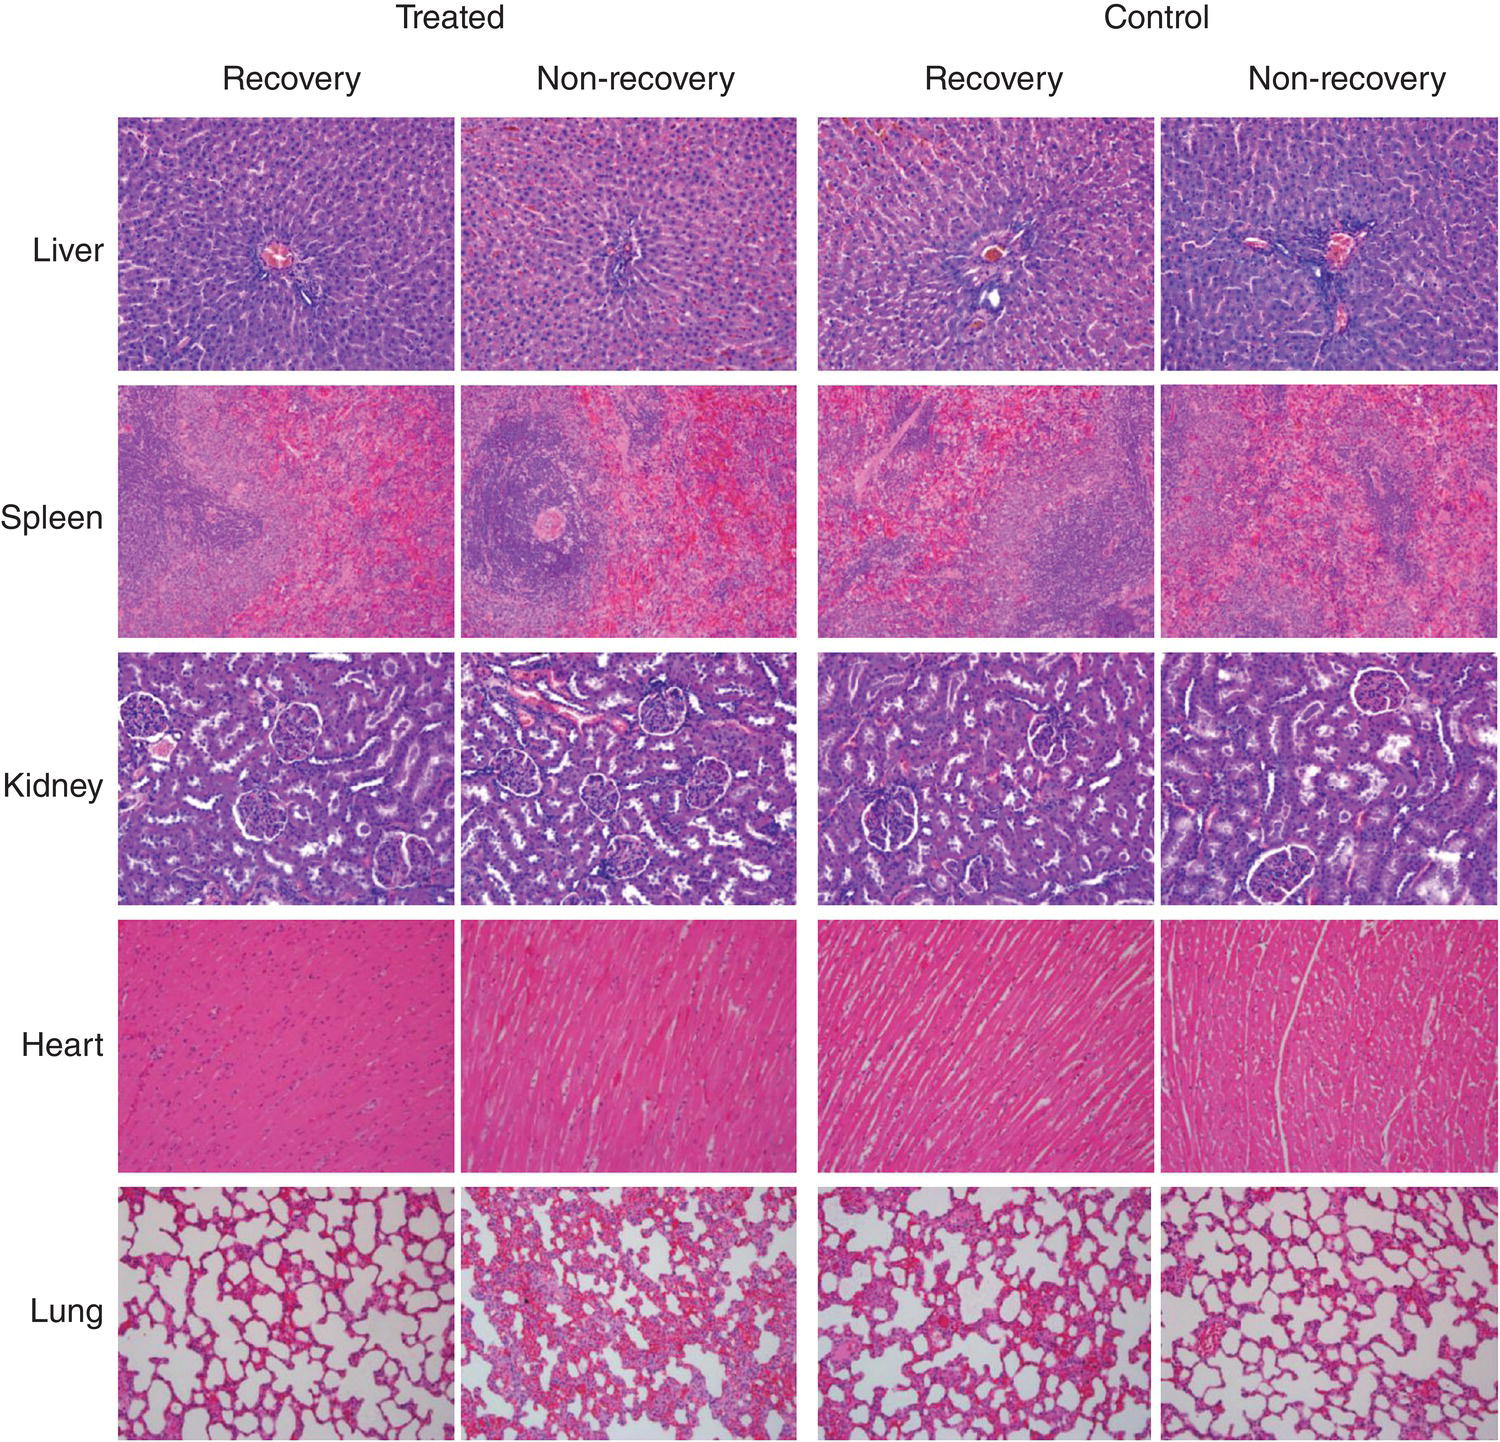 Micrographs displaying histopathological examination results of the liver, spleen, kidney, heart, and lung tissue sections of FND‐injected (treated) and saline-injected (control) rats with and without recovery.